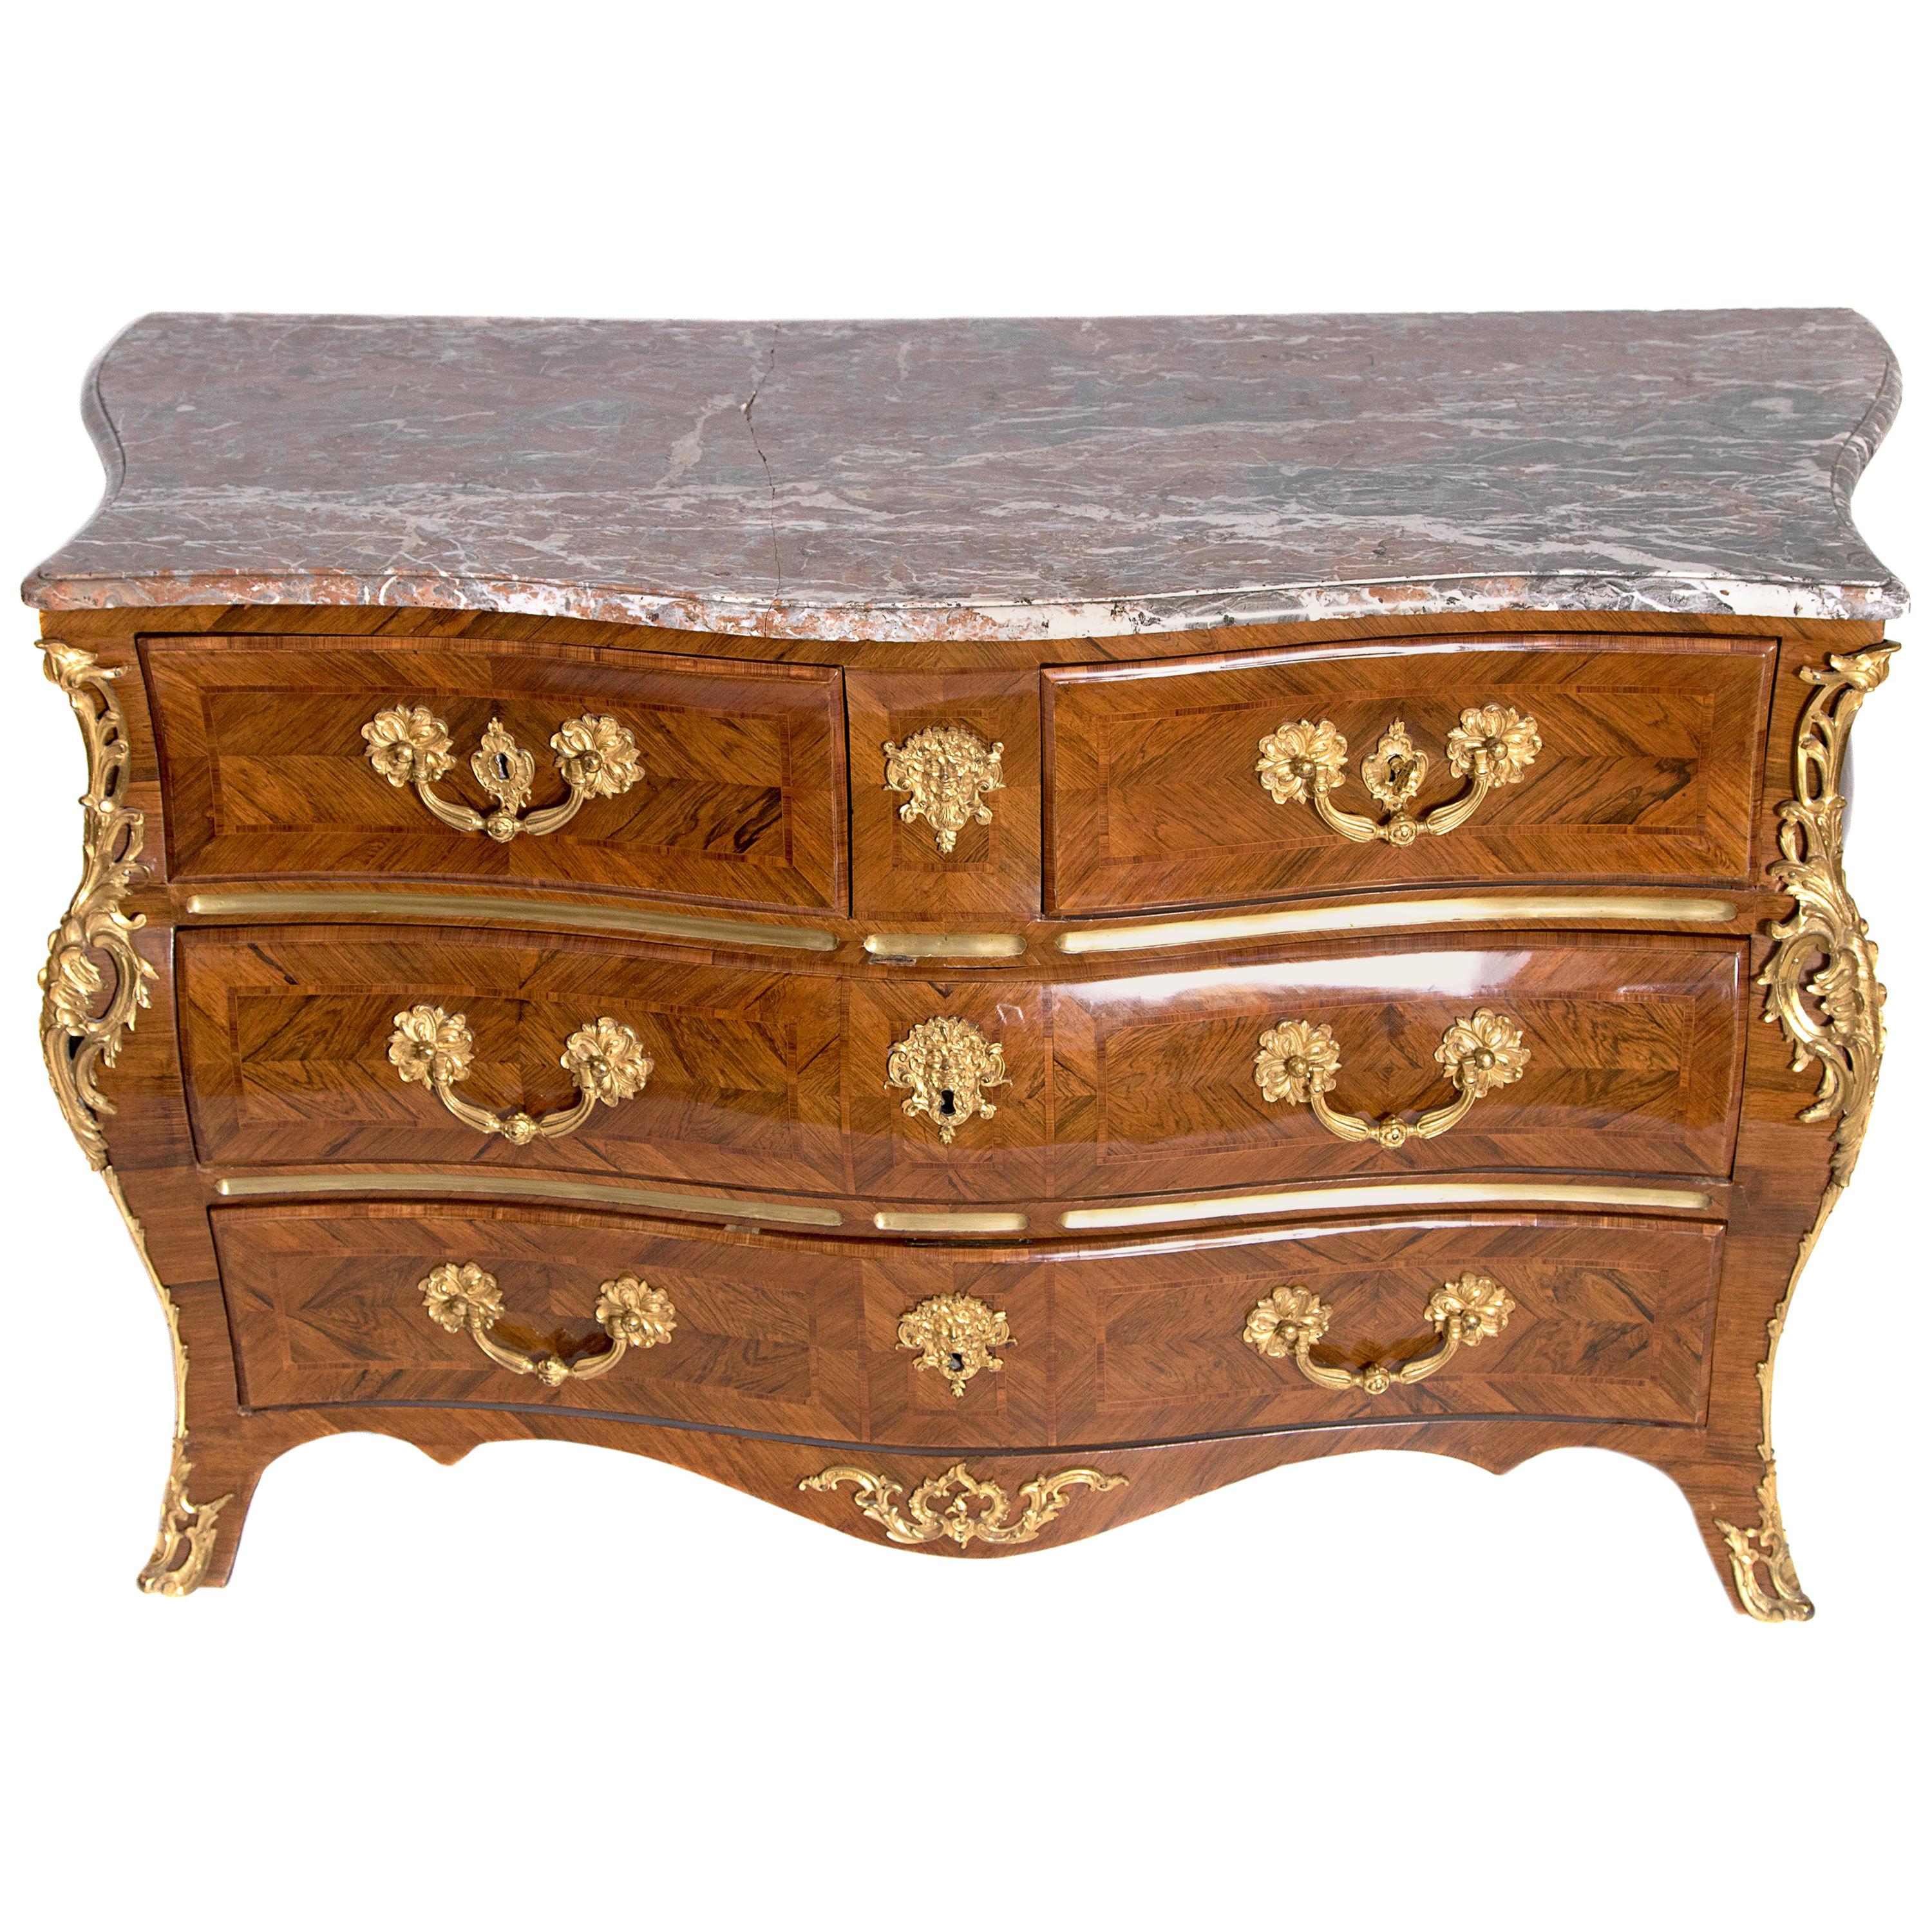 Early 18th Century French Regence Dore Bronze Bombe Commode For Sale